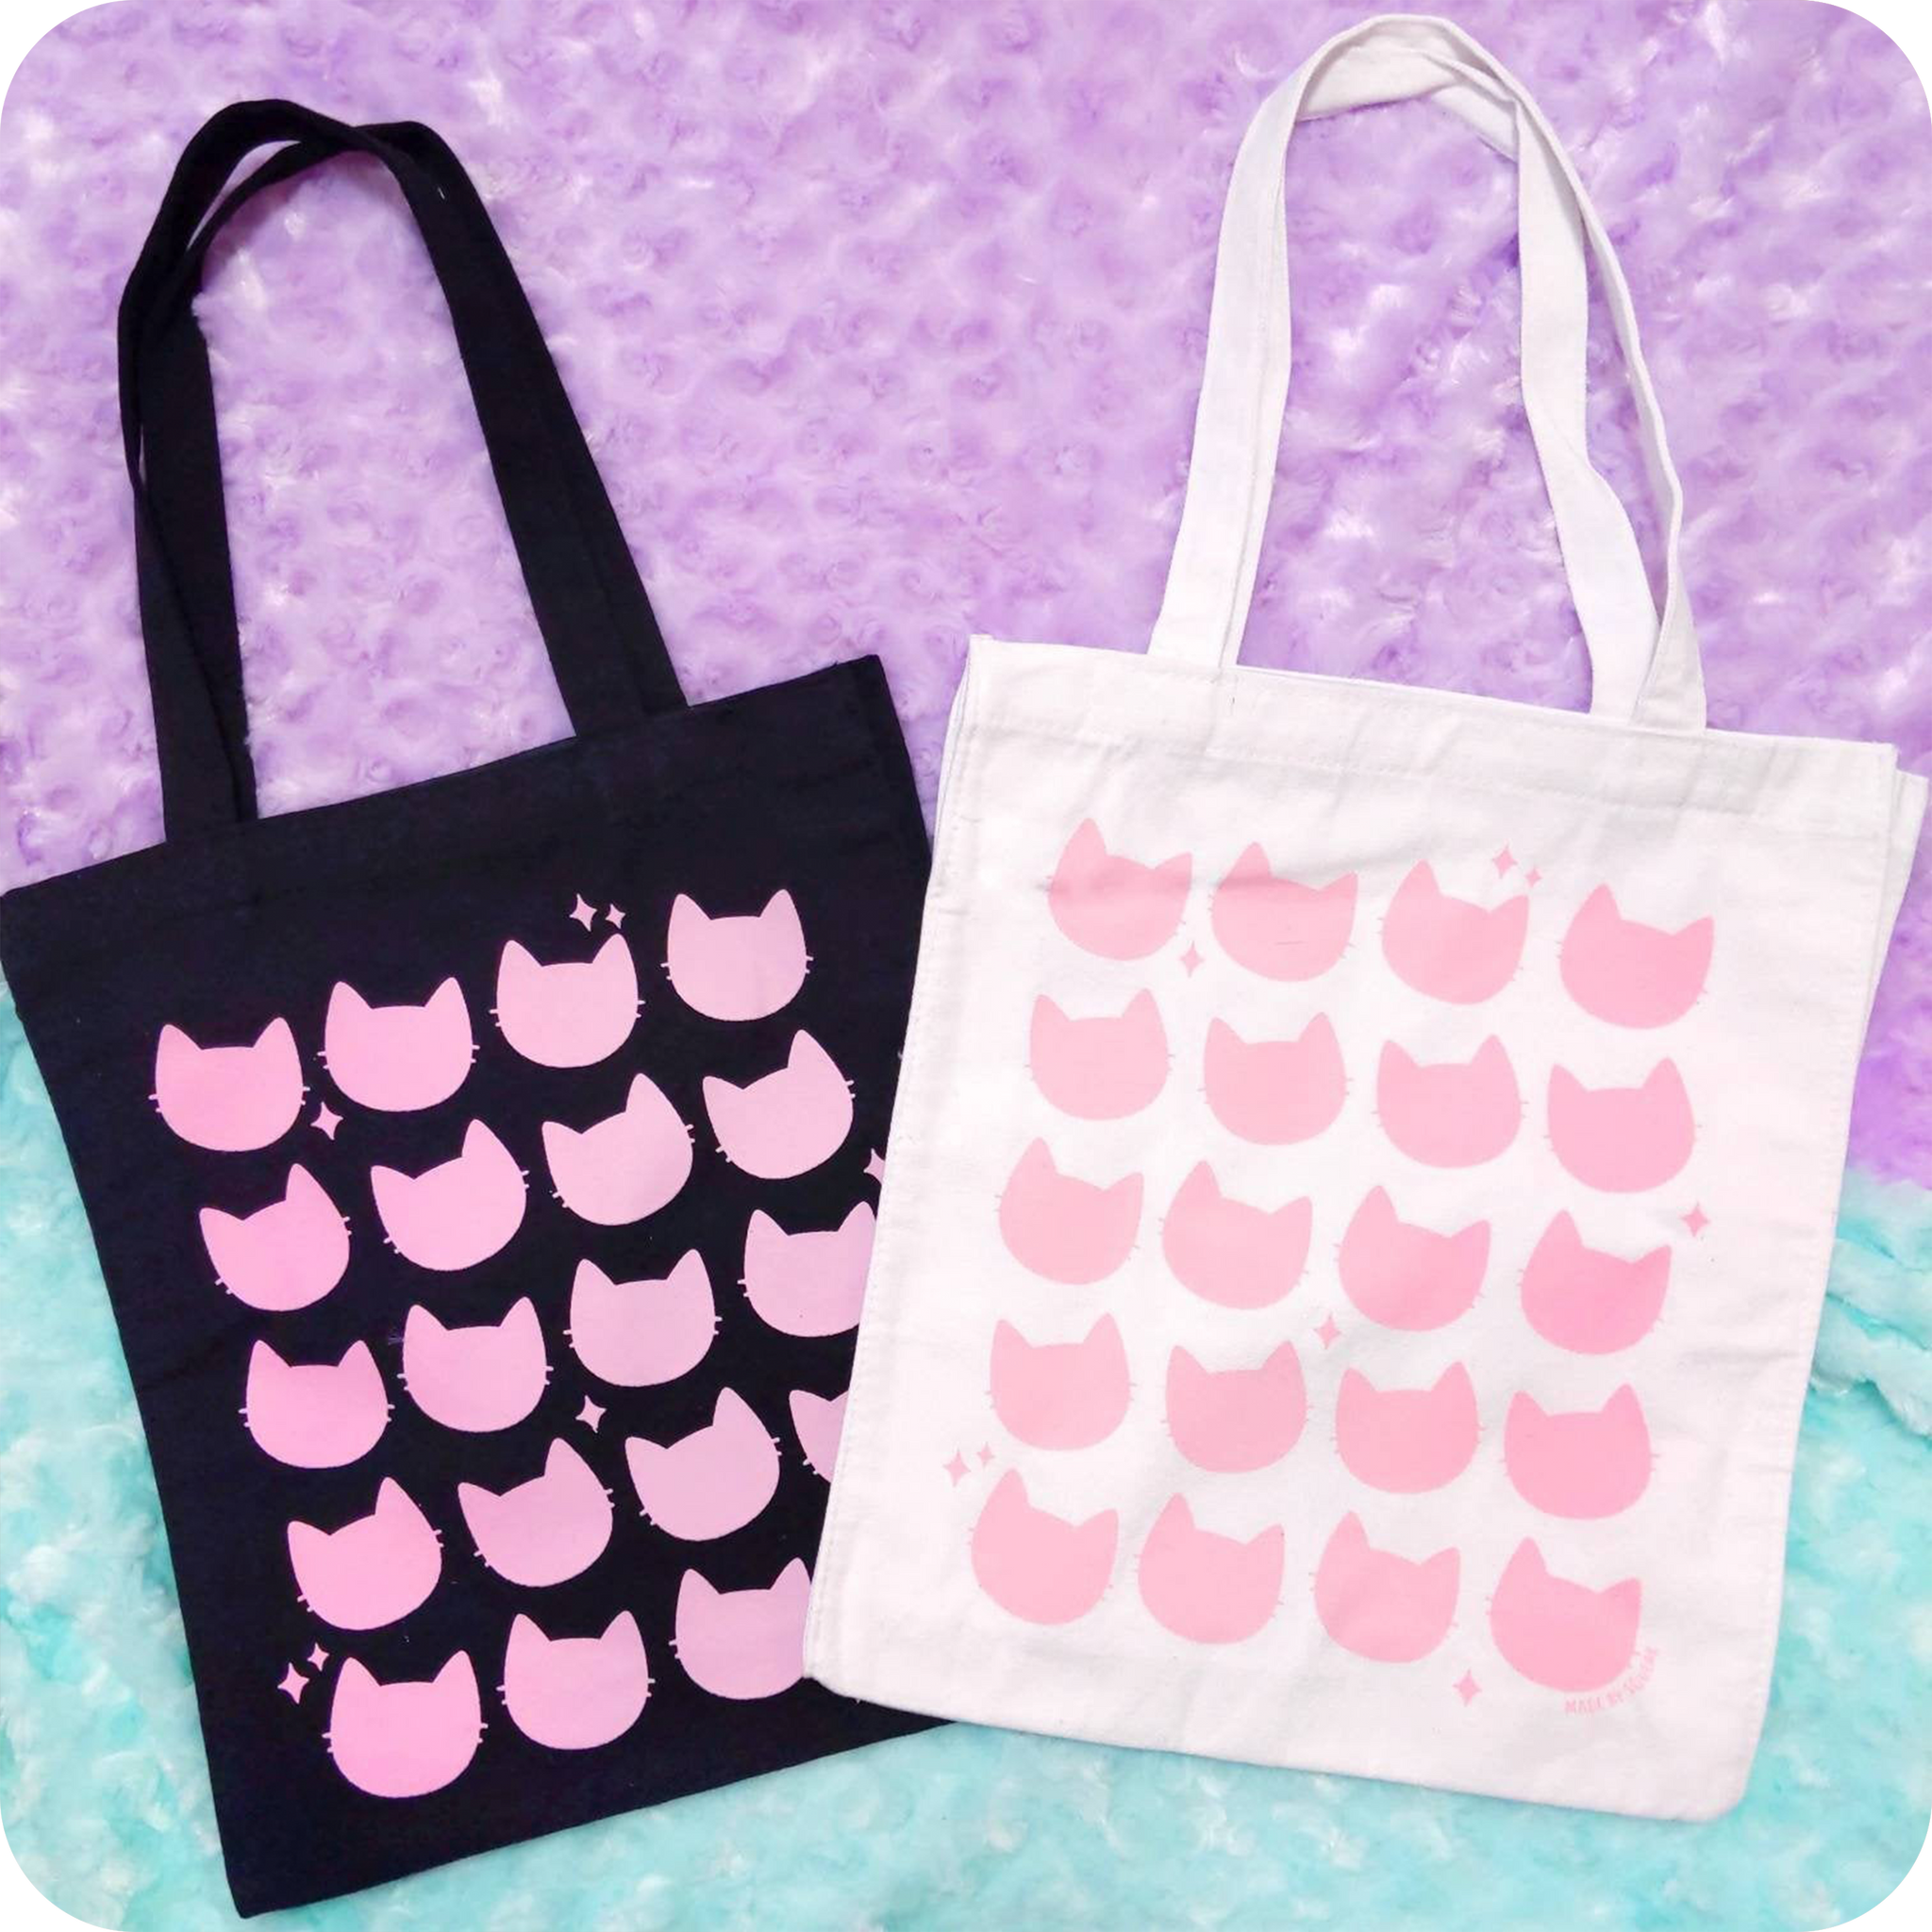 Pin on Bags and totes